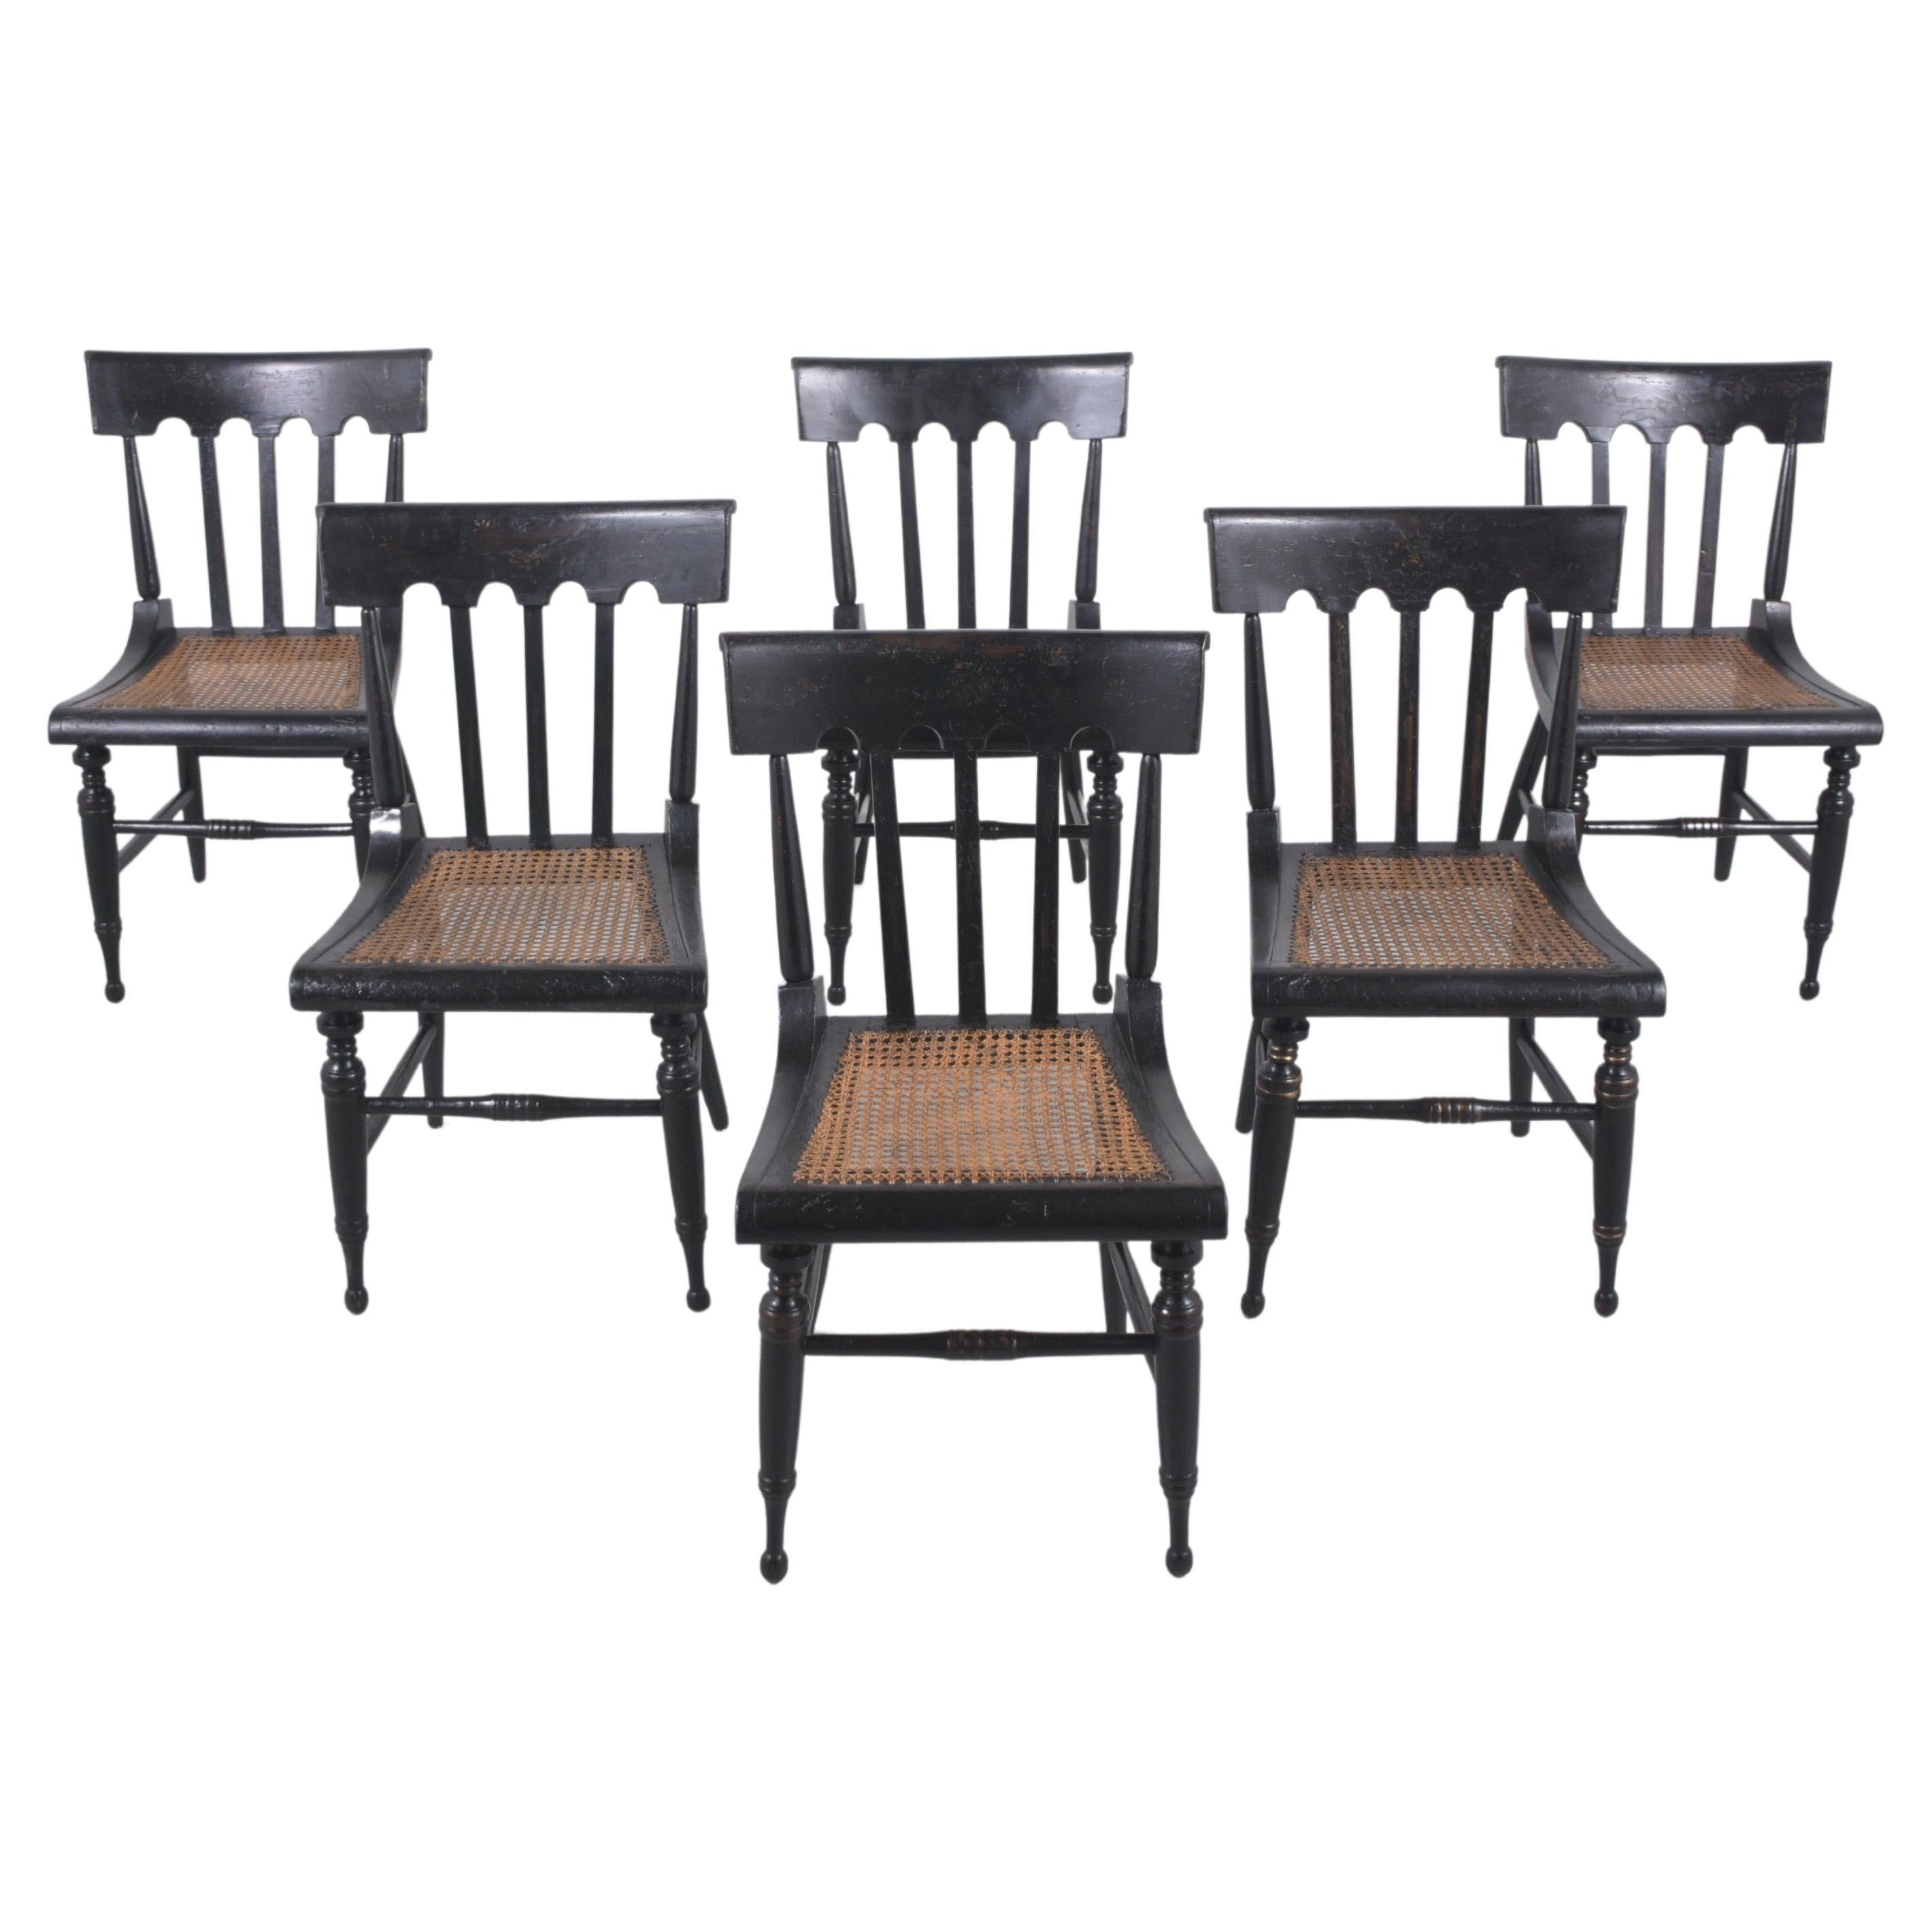 Set of Six Antique Cane Dining Chairs